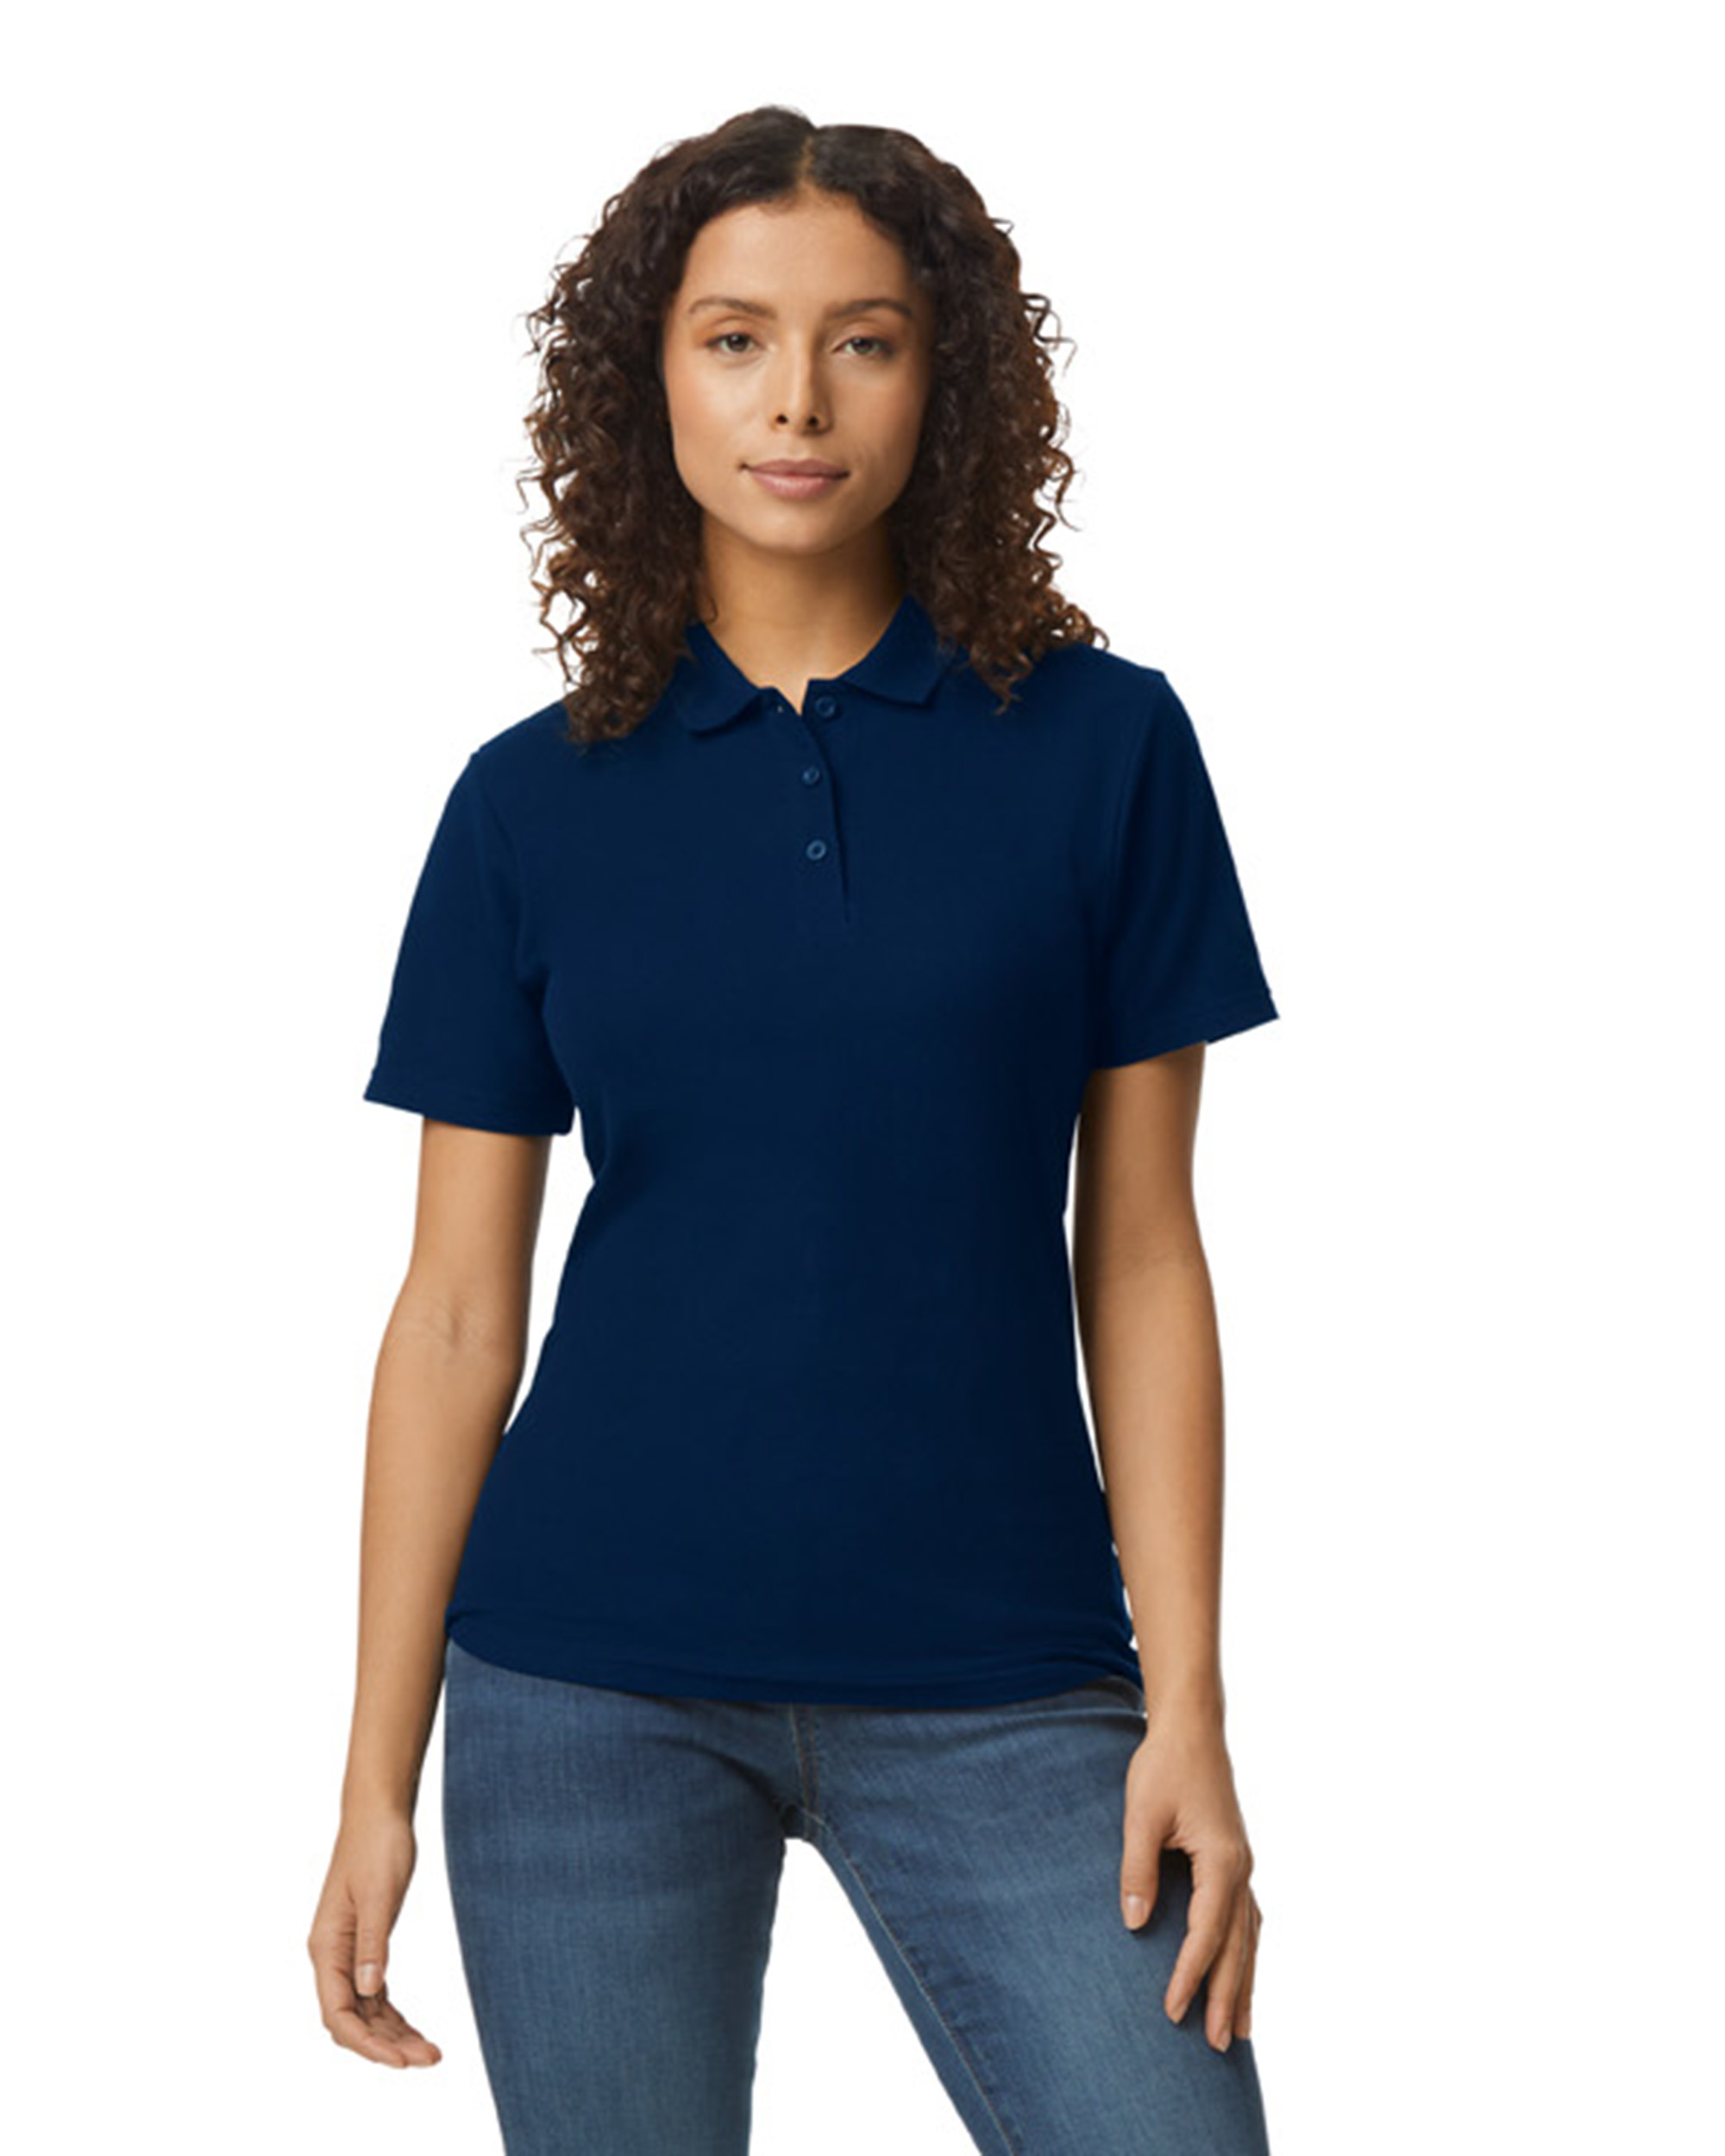 G648L Ladies Softstyle Double Pique Polo